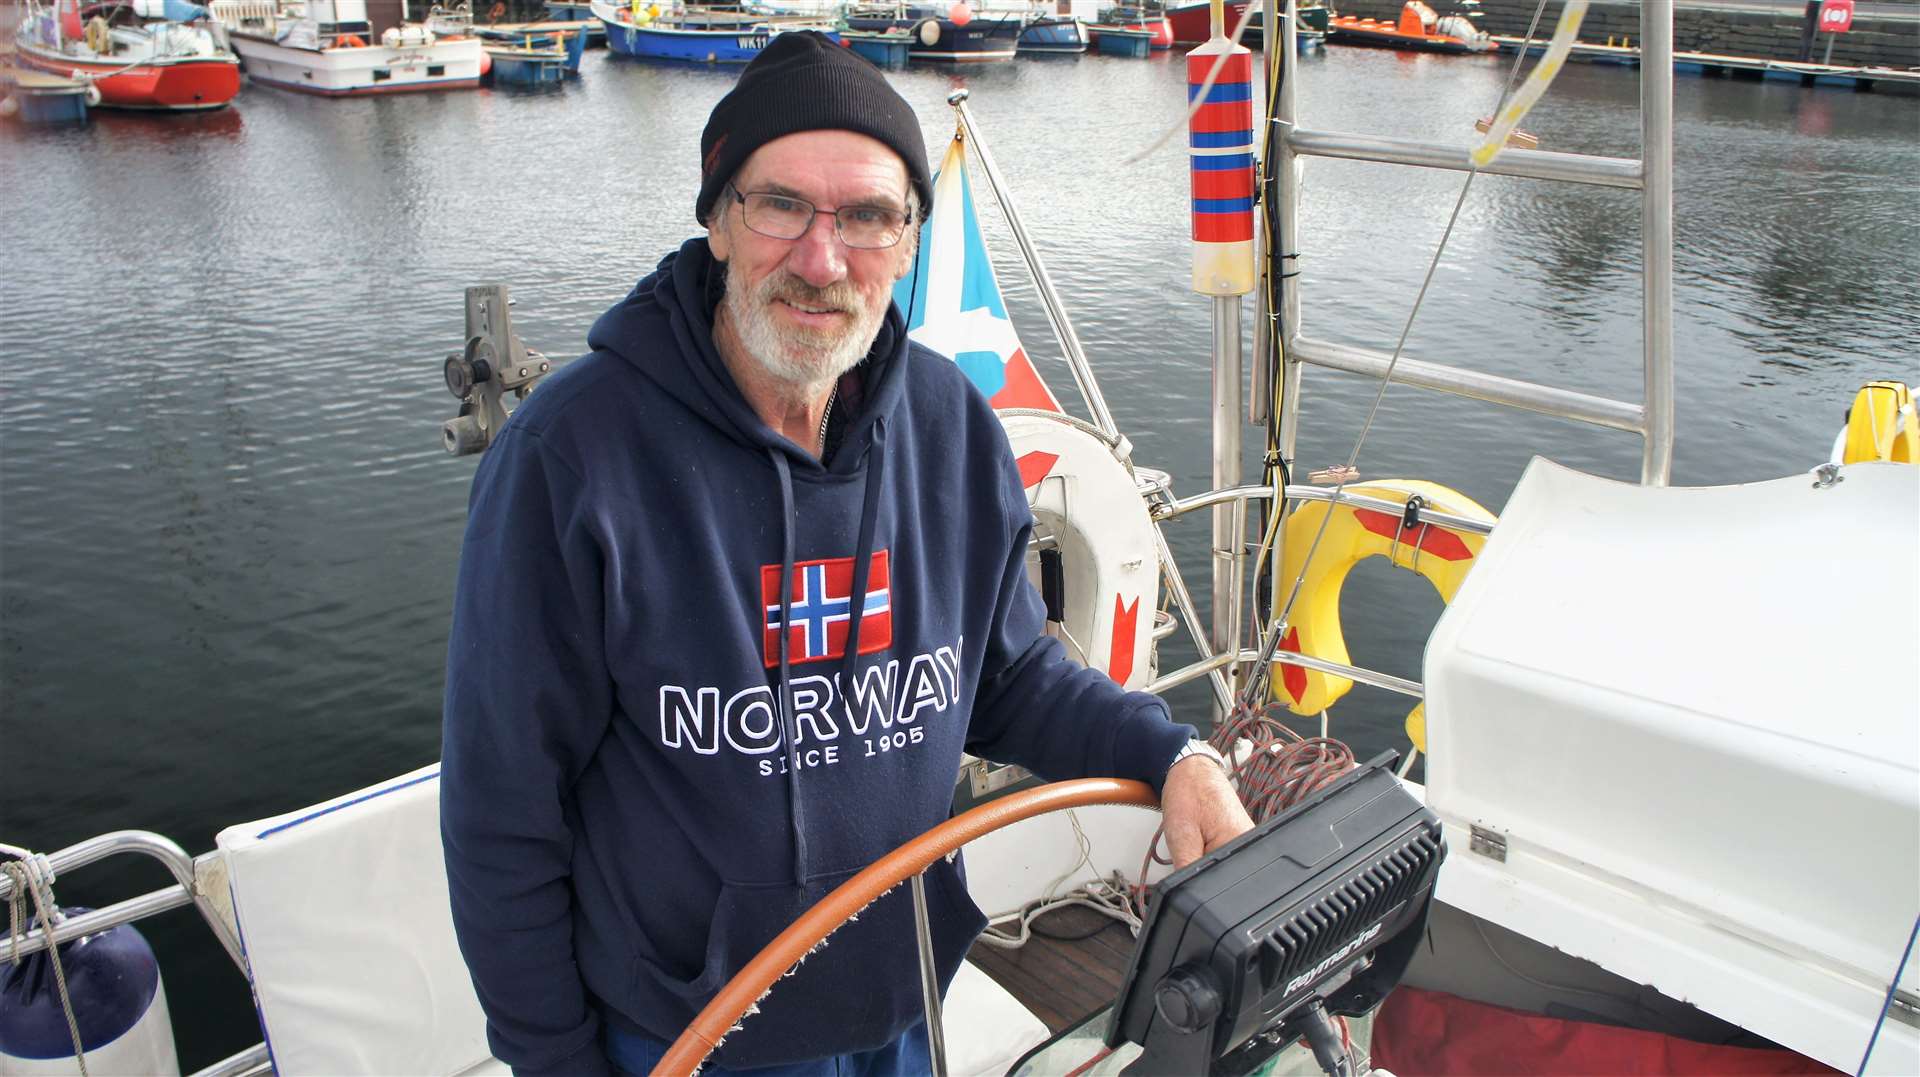 George Durrand organised the Wick Yachties event and was delighted that the day went well. Picture: DGS